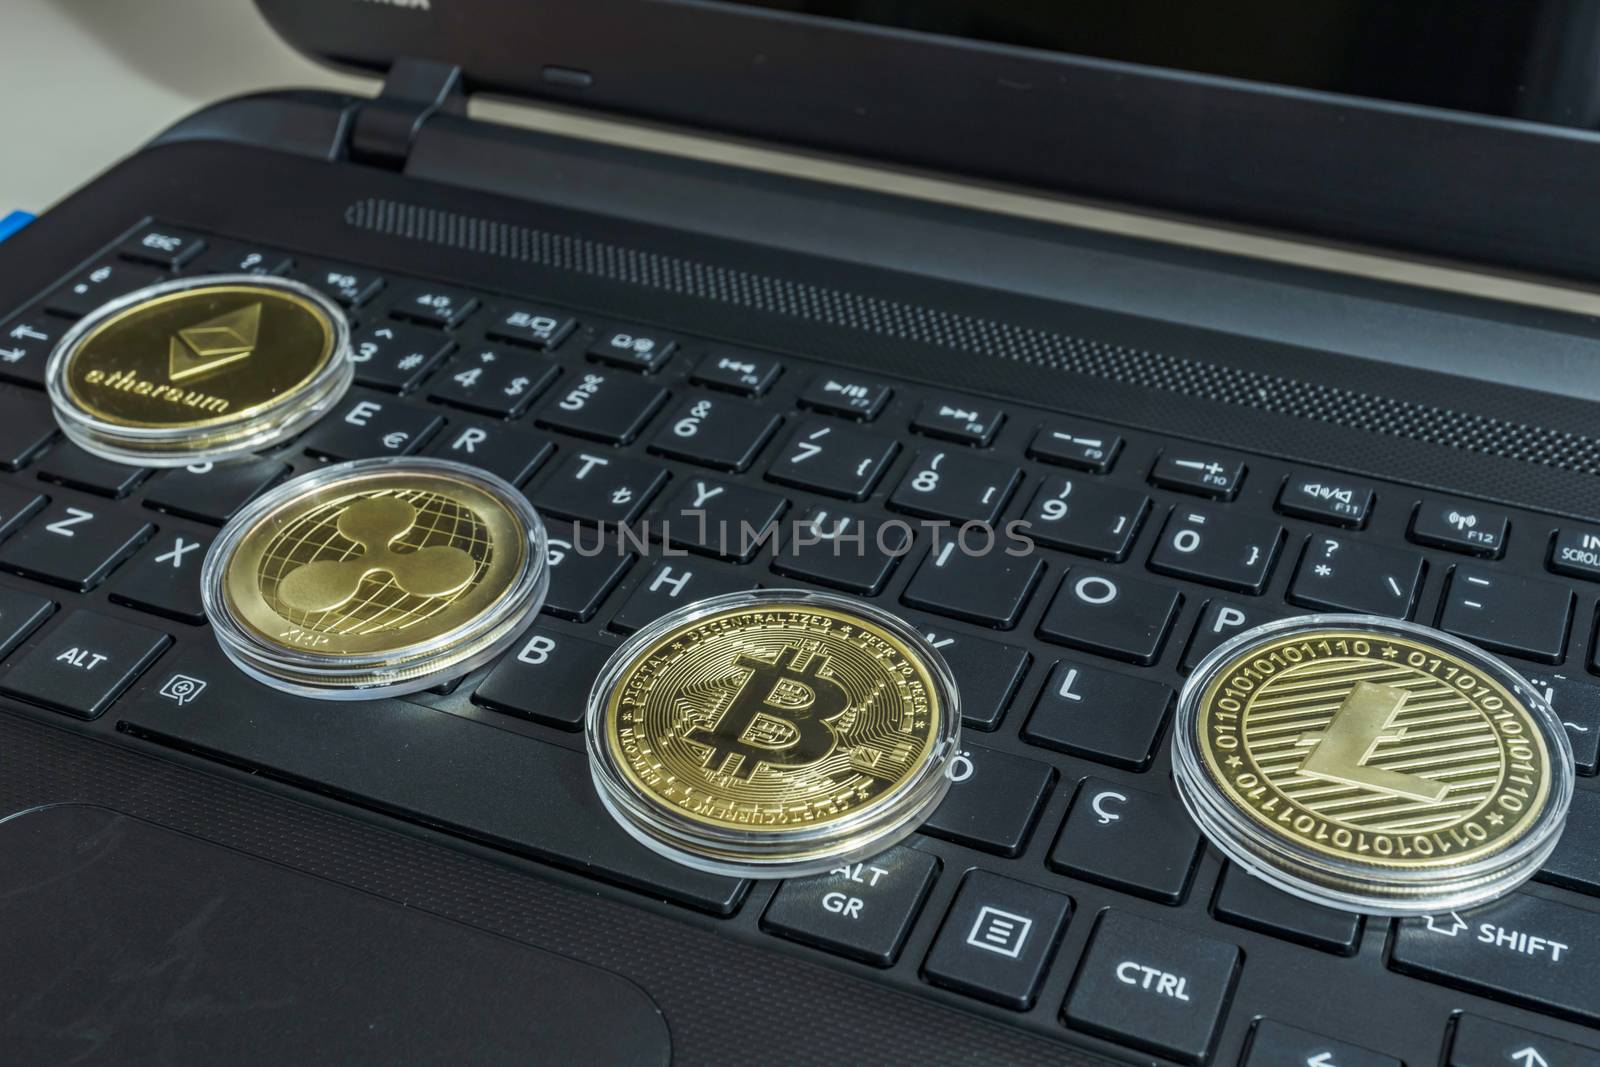 A cryptocurrency is a digital asset designed to work as a medium of exchange that uses strong cryptography to secure financial transactions, control the creation of additional units, and verify the transfer of assets